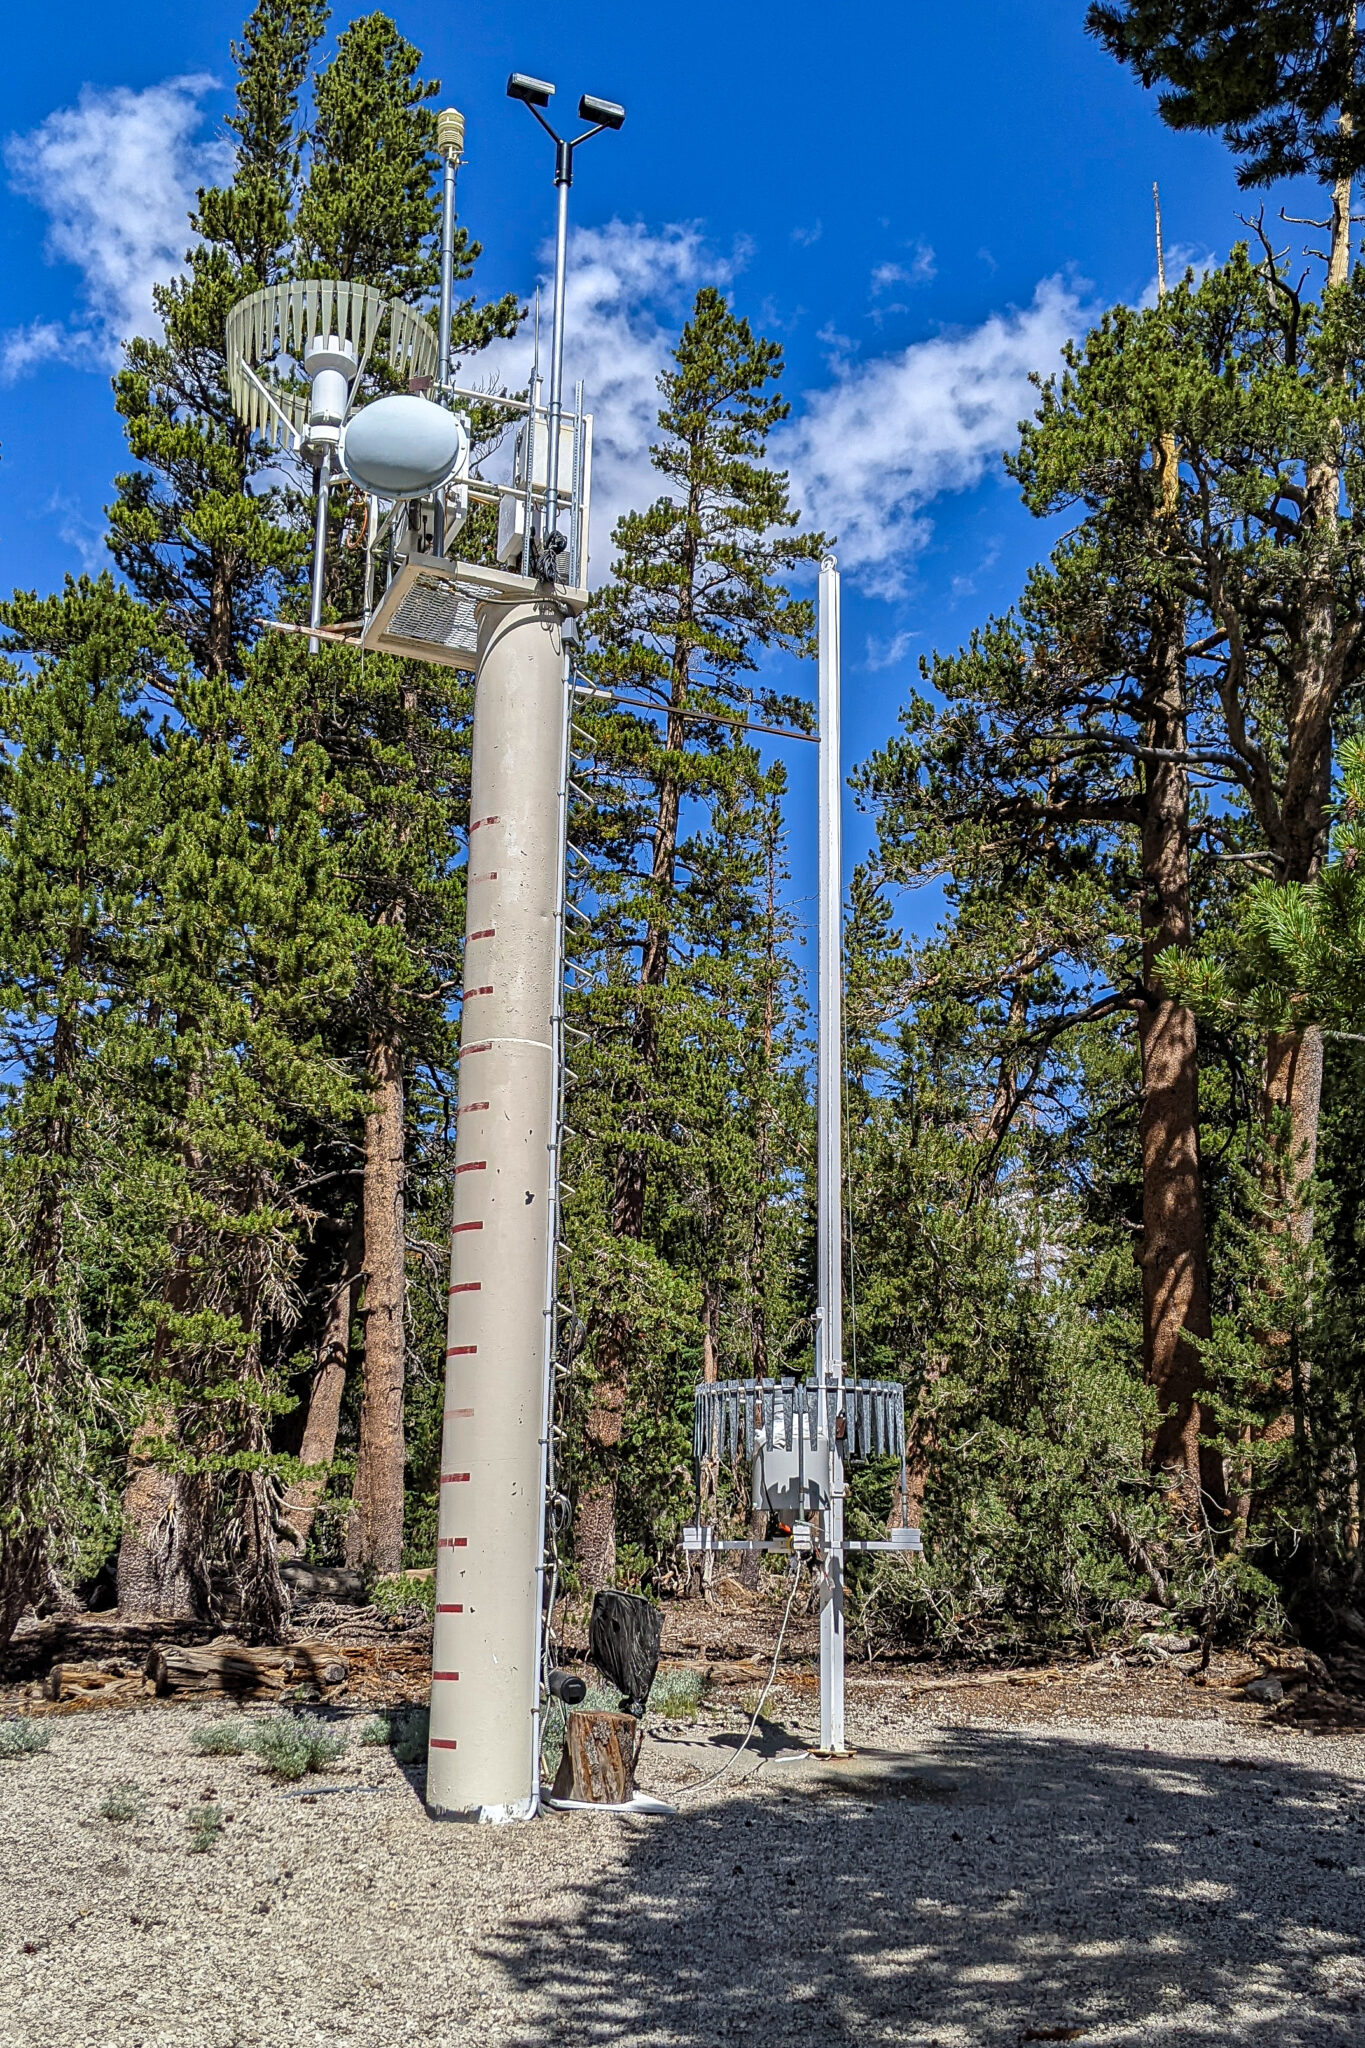 The Mammoth Mountain Ski Patrol Snow Study Site is at the 9000-foot elevation.